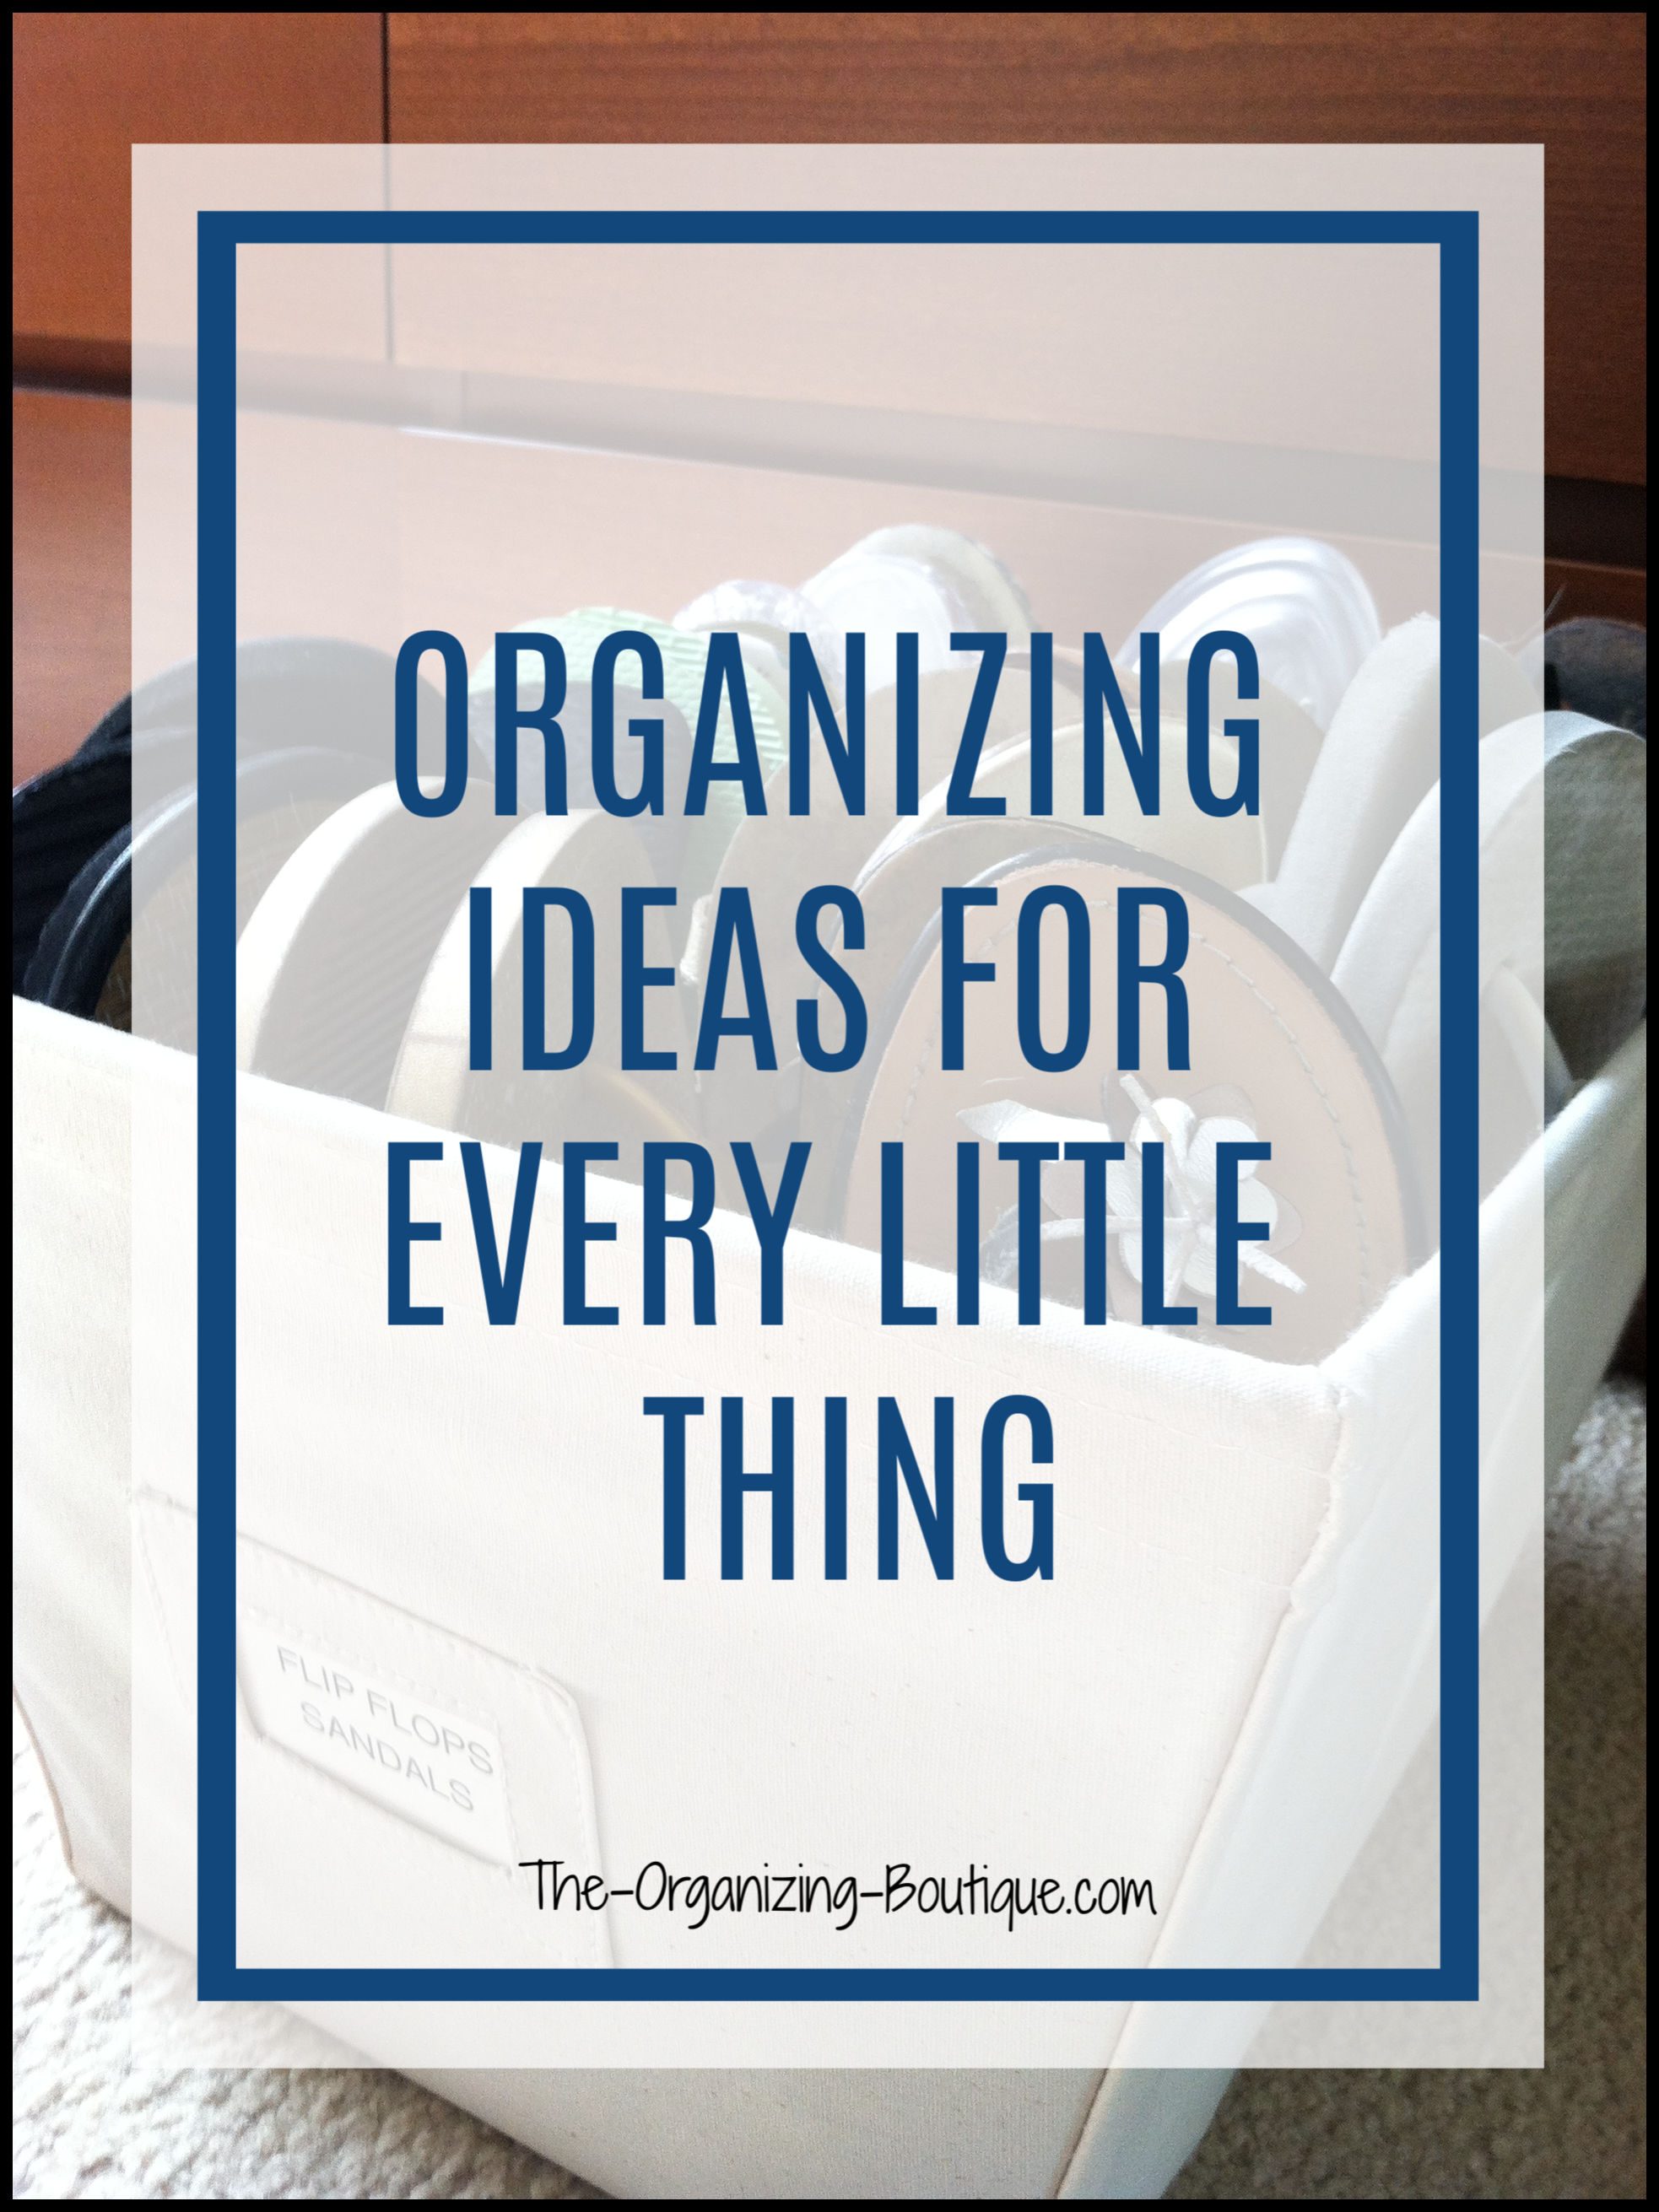 ANYTHING can be organized! Use these simple organizing ideas to create your organized home - crafts, books, photos, scrapbooks, coupons and much more!